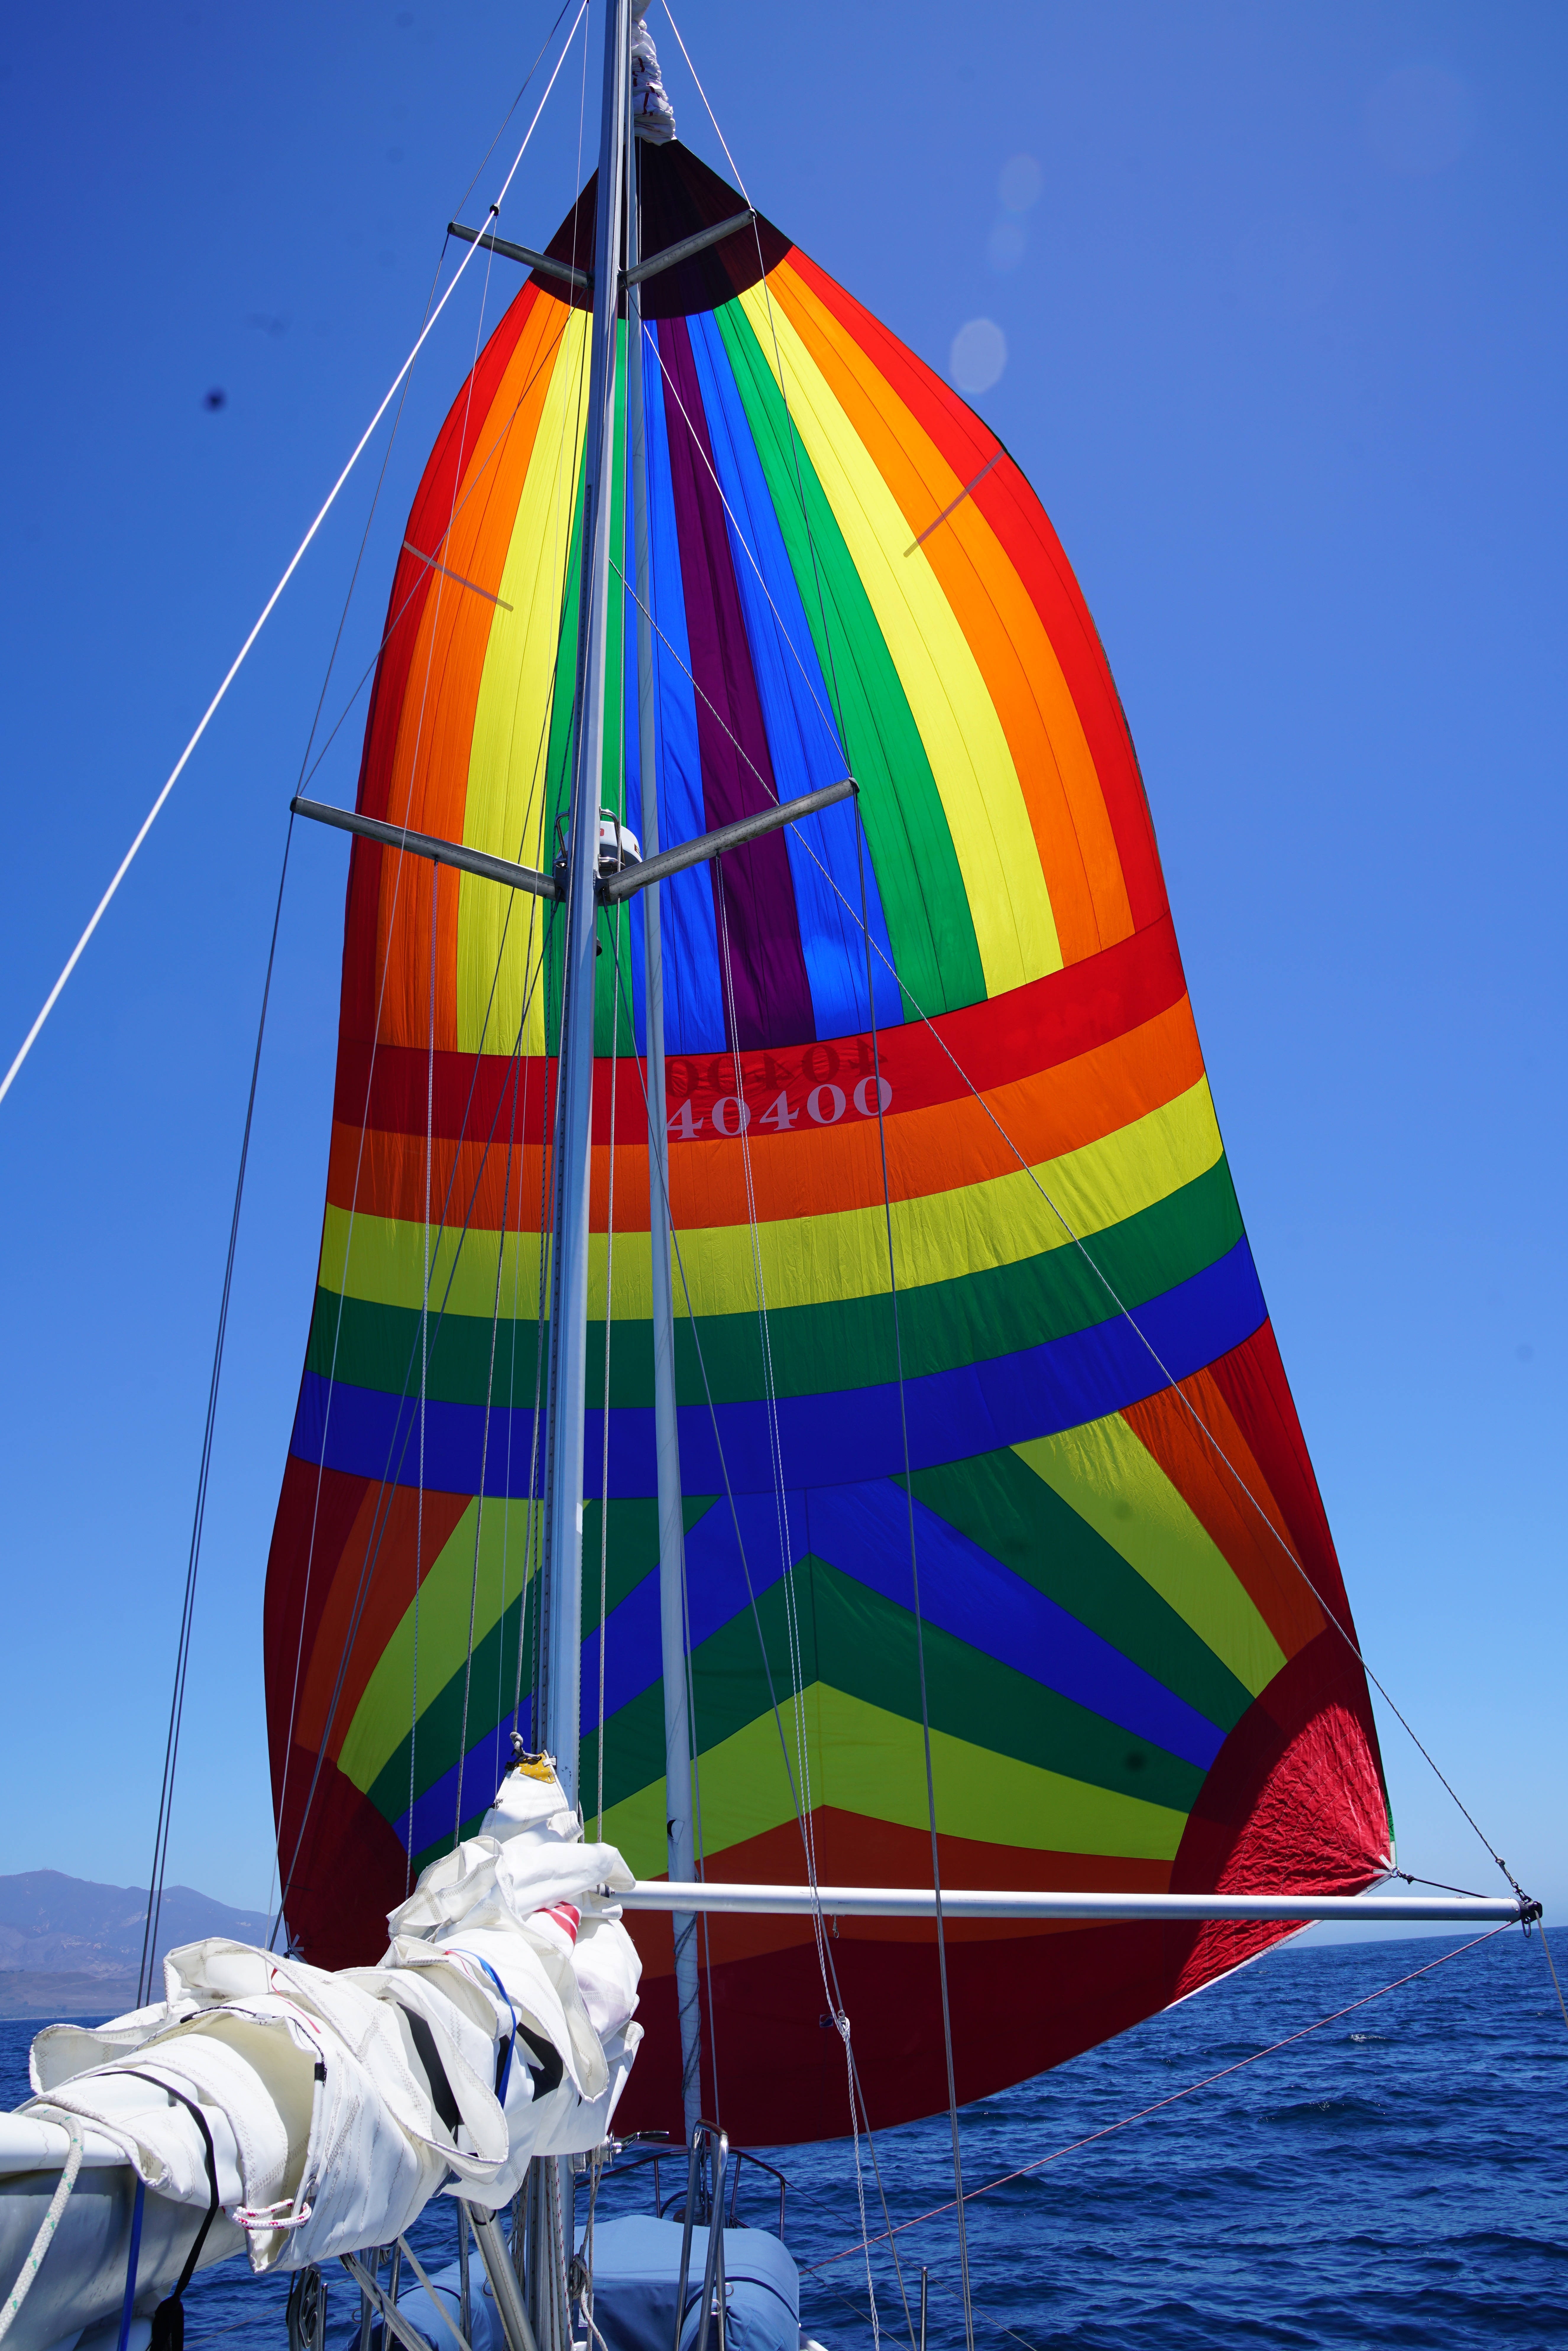 Flying spinnaker for first time